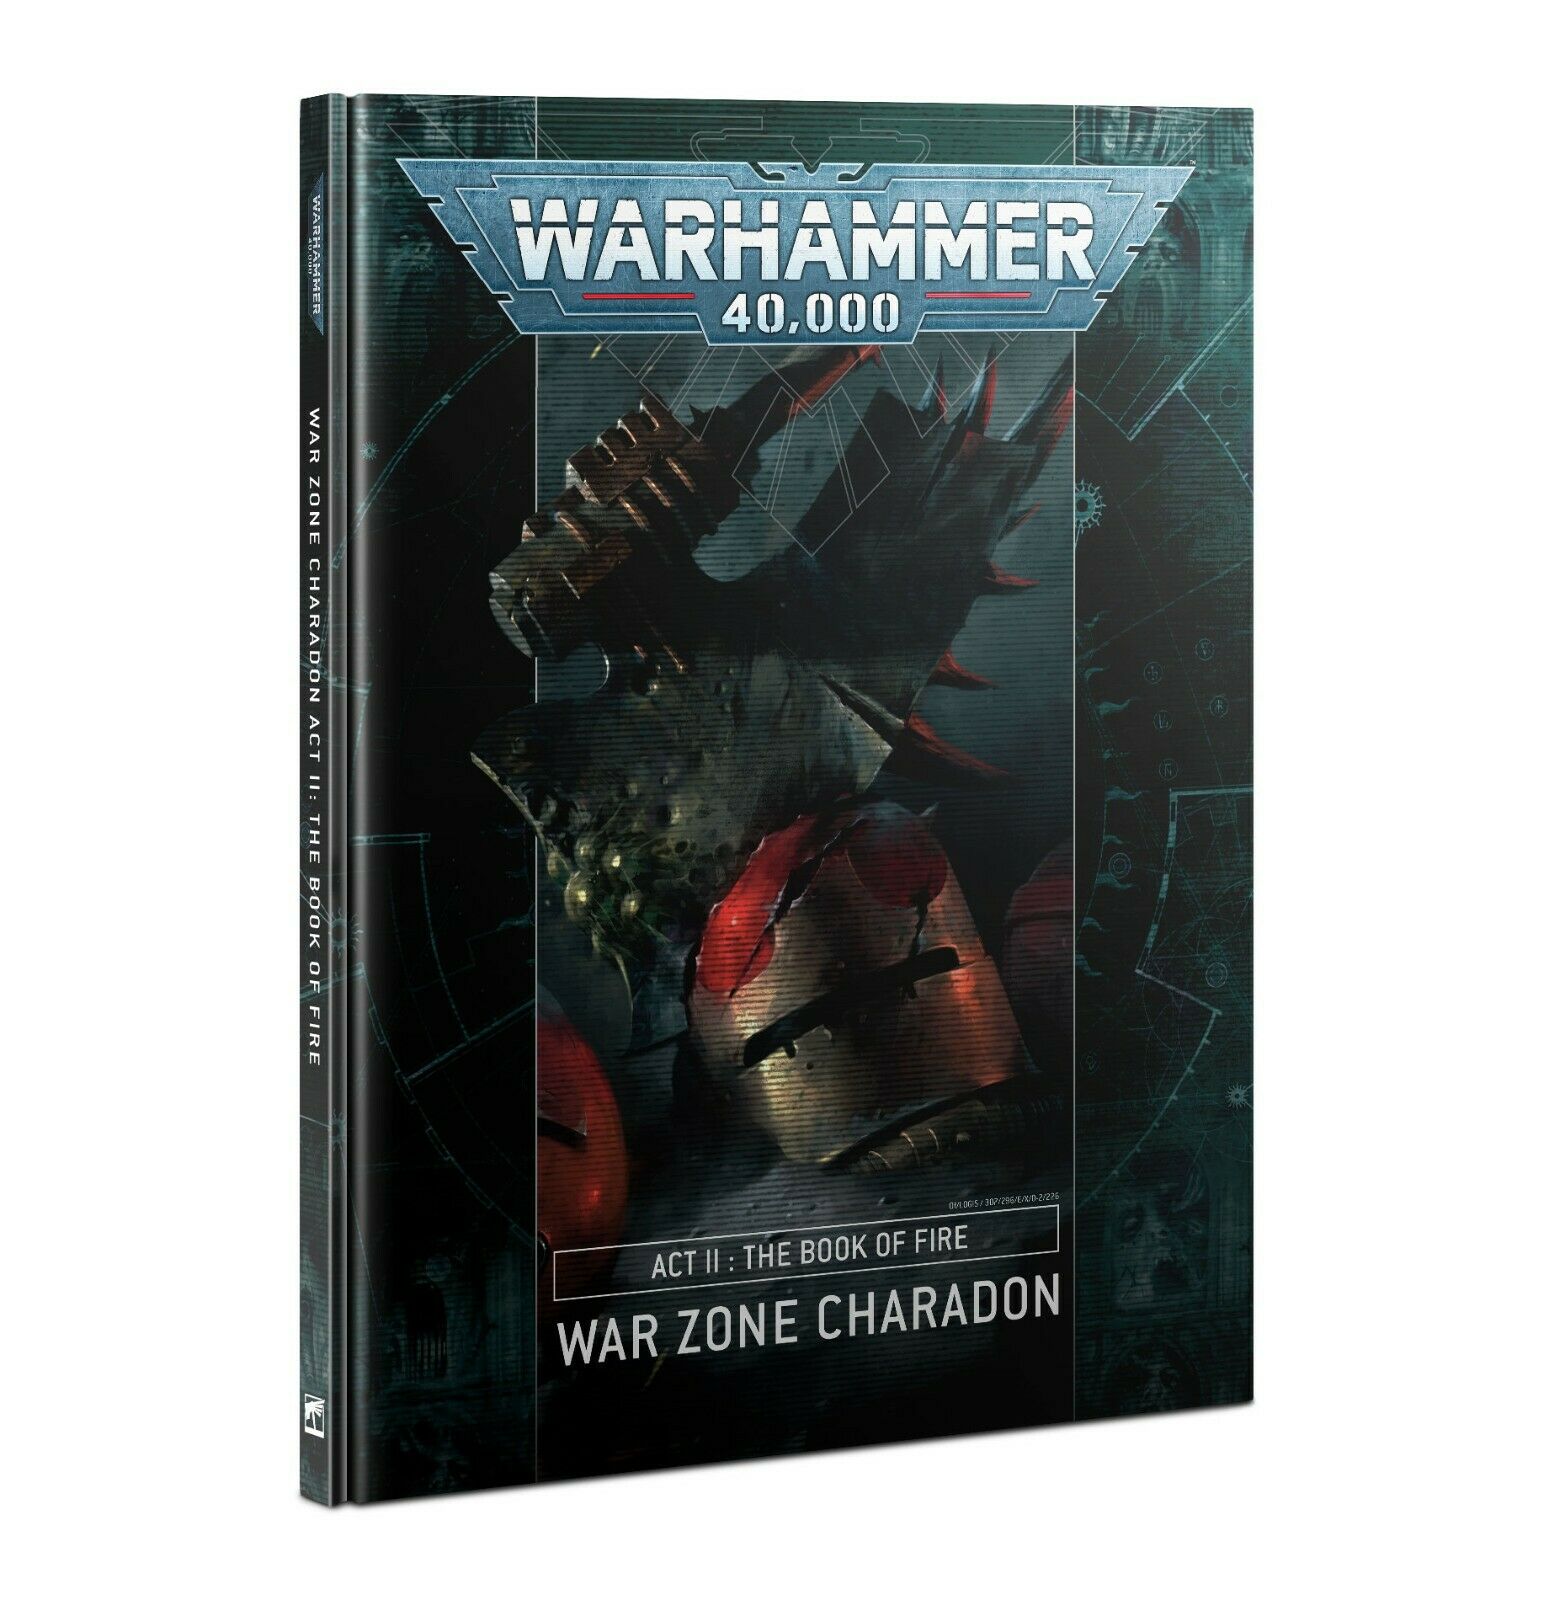 Warhammer 40K: War Zone Charadon, Act 2 - Book of Fire (Hardcover) -=NEW=-